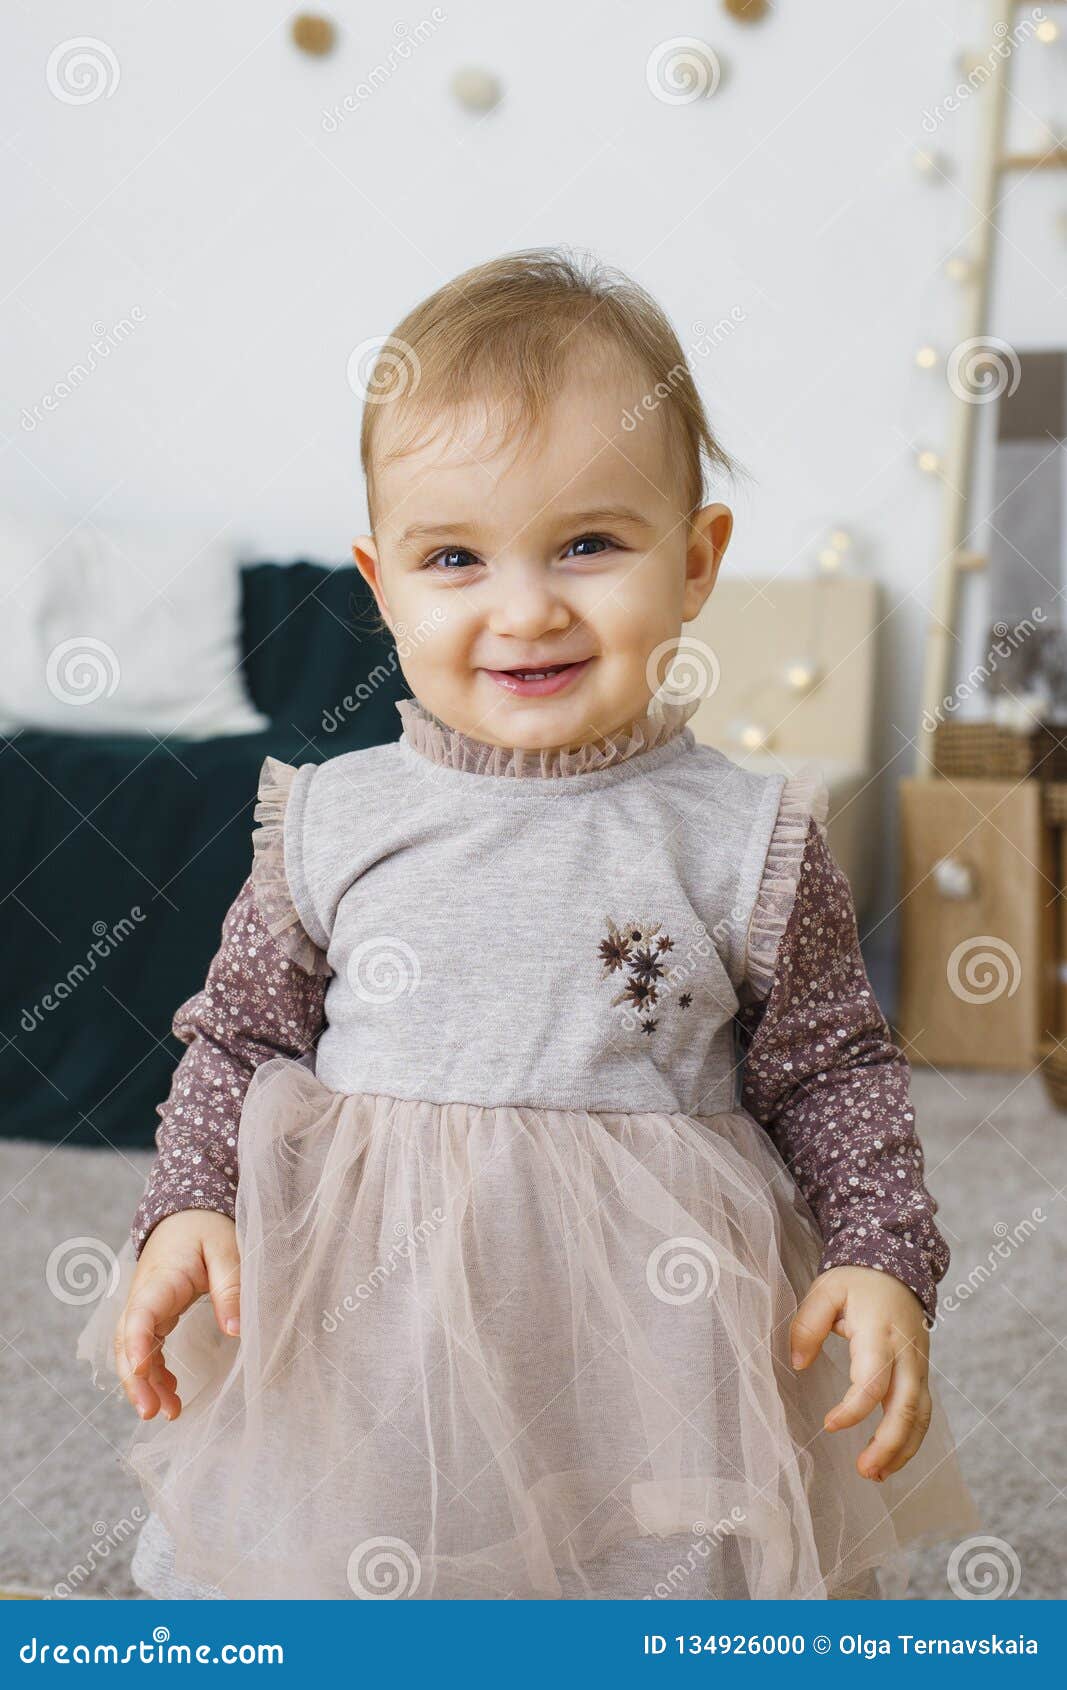 Image of Sweet and Cute Baby Girl in Dress, Portrait of Beautiful ...